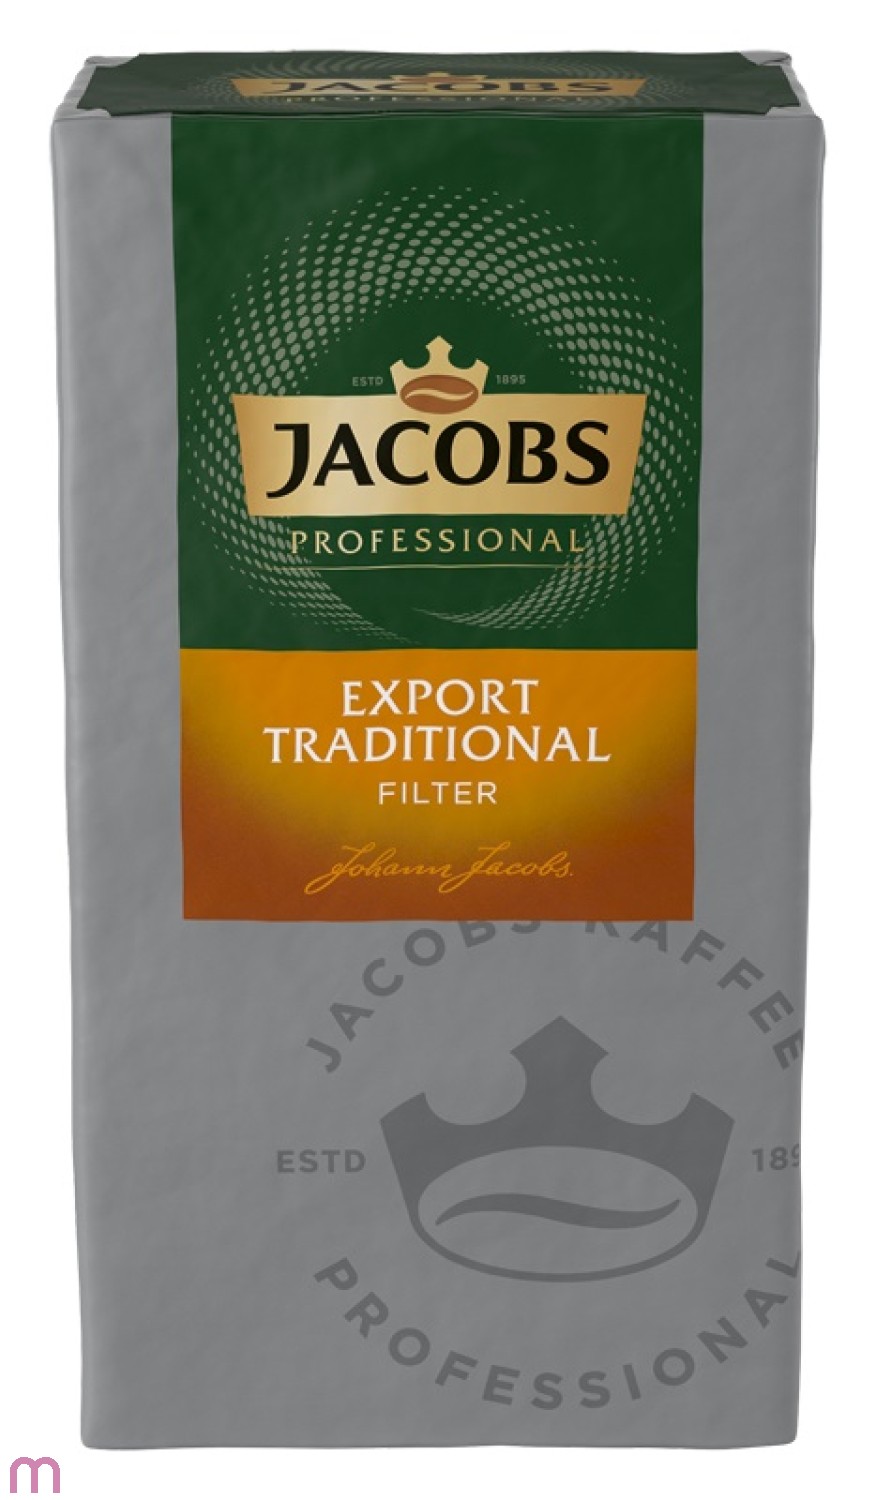 Jacobs Export Traditional Filter 500 g gemahlen